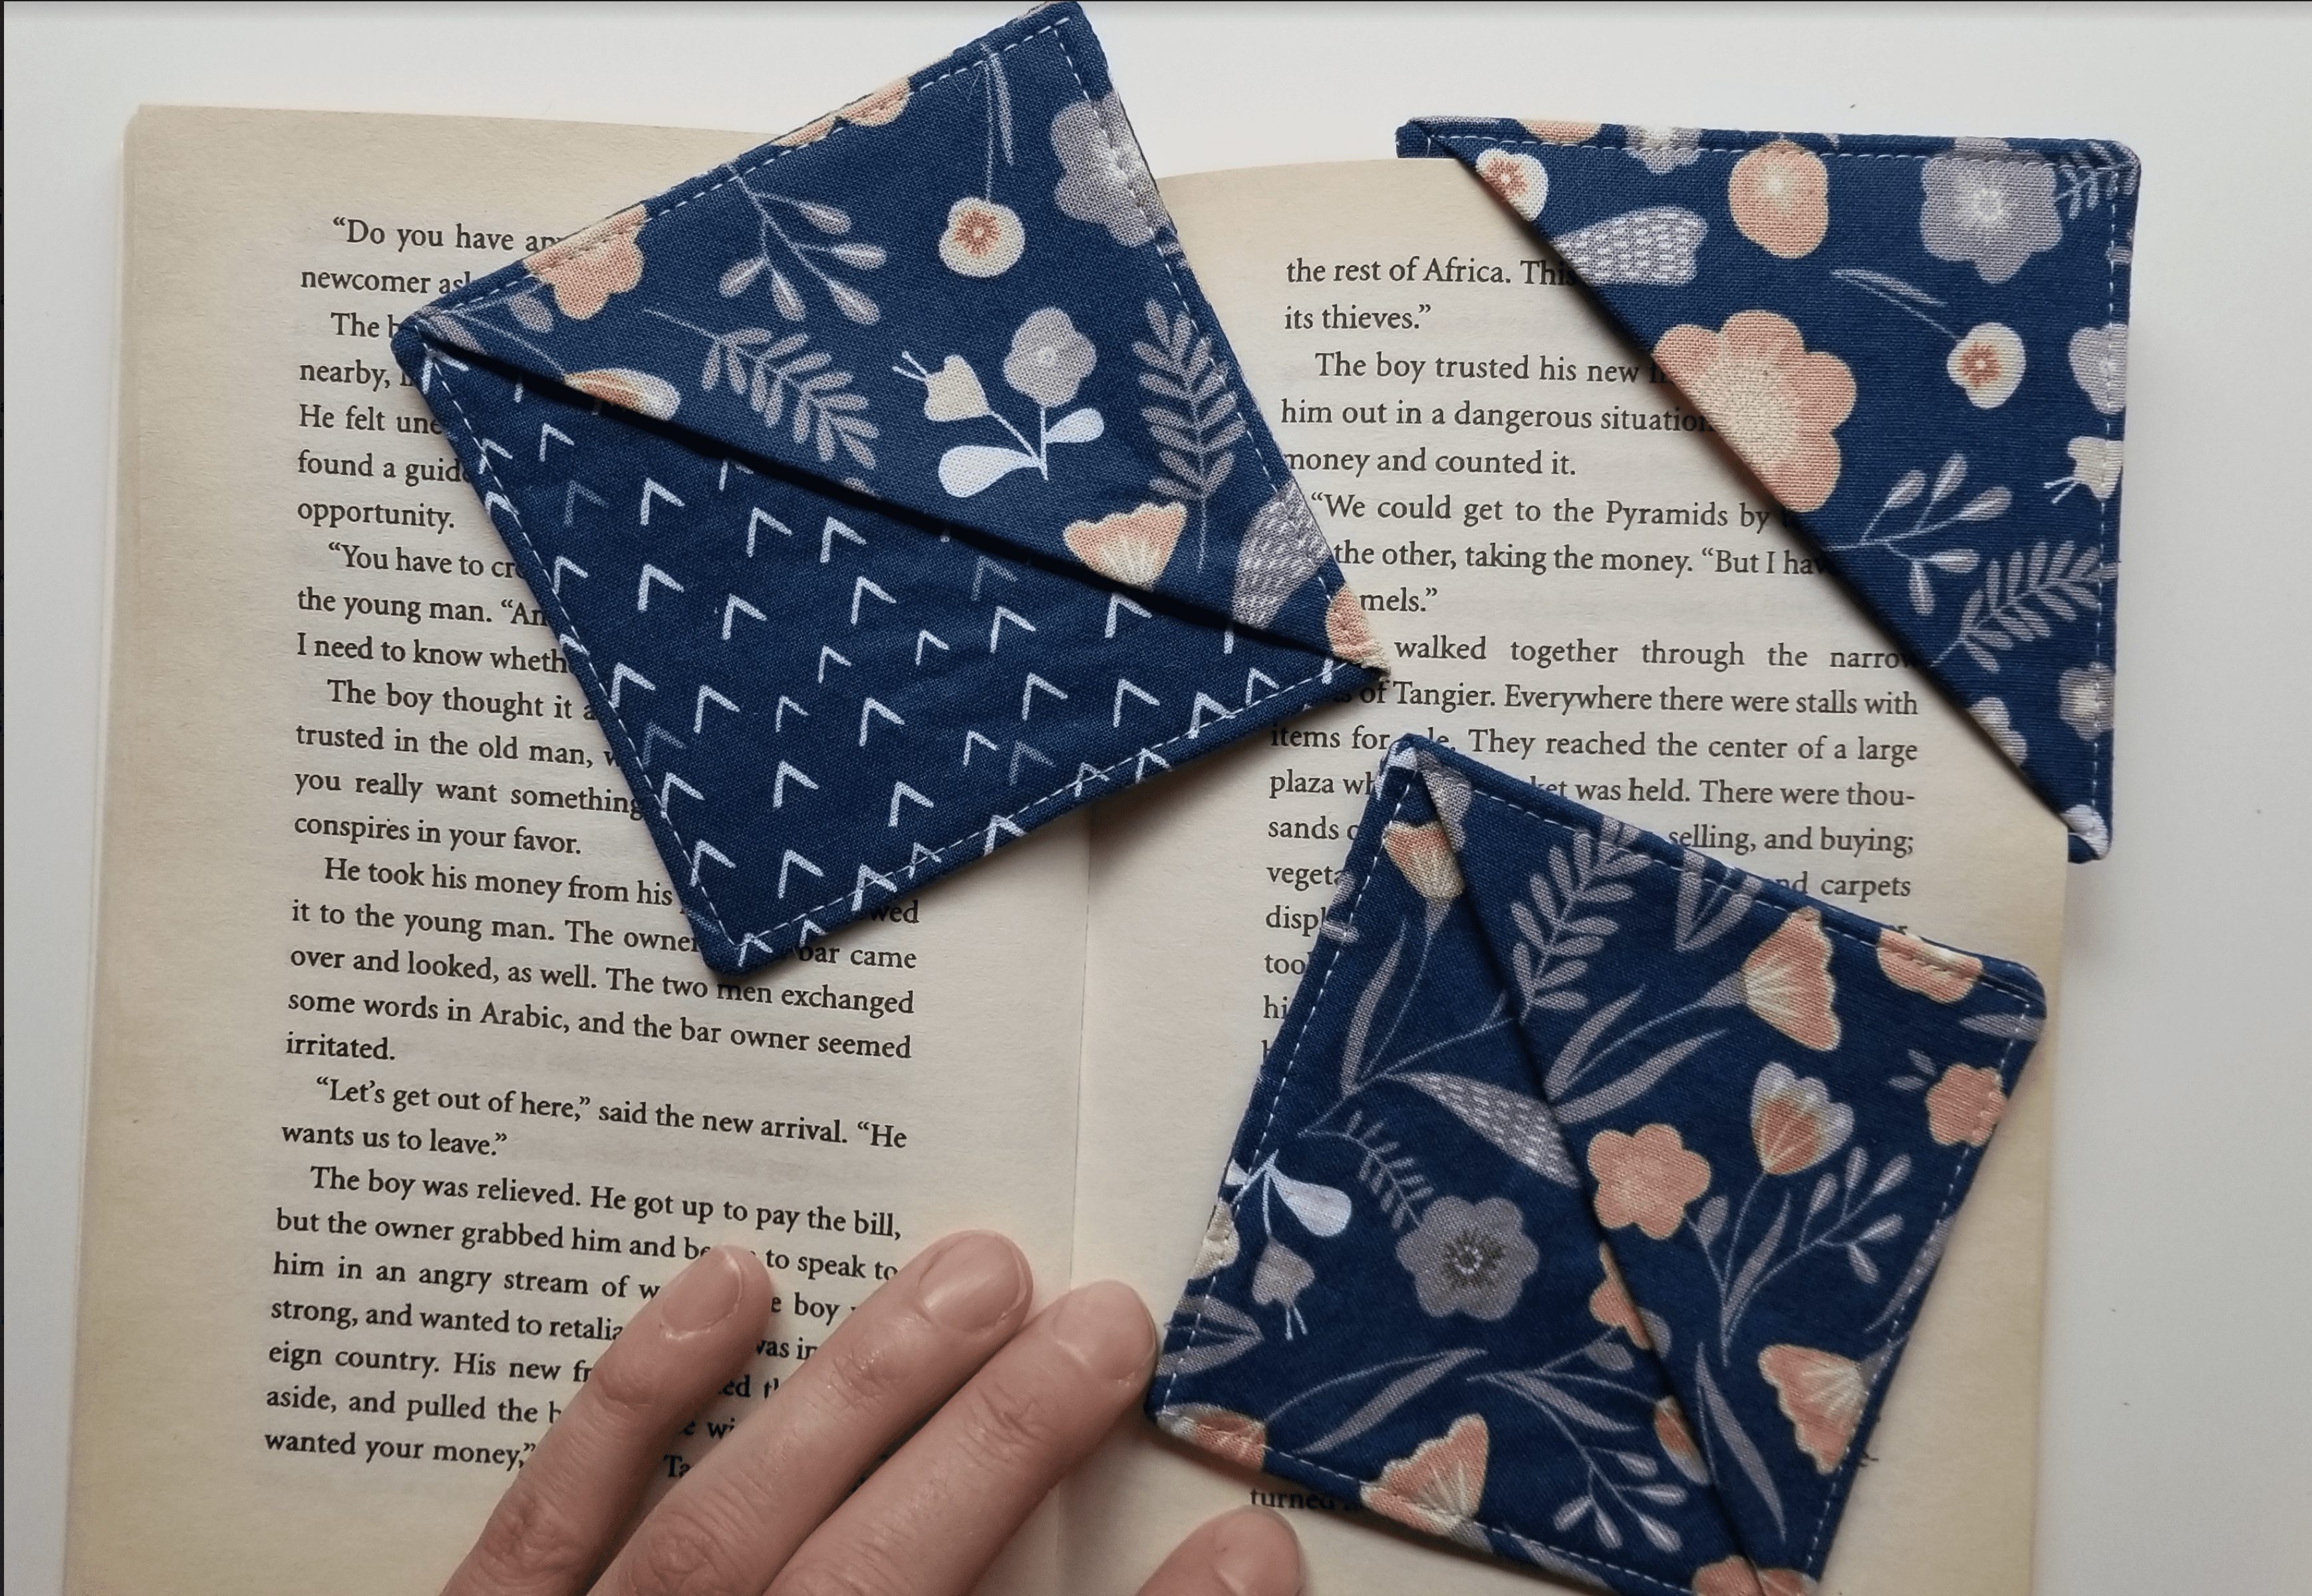 3 fabric book marks made of blue fabric, one being used to hold a book's spot